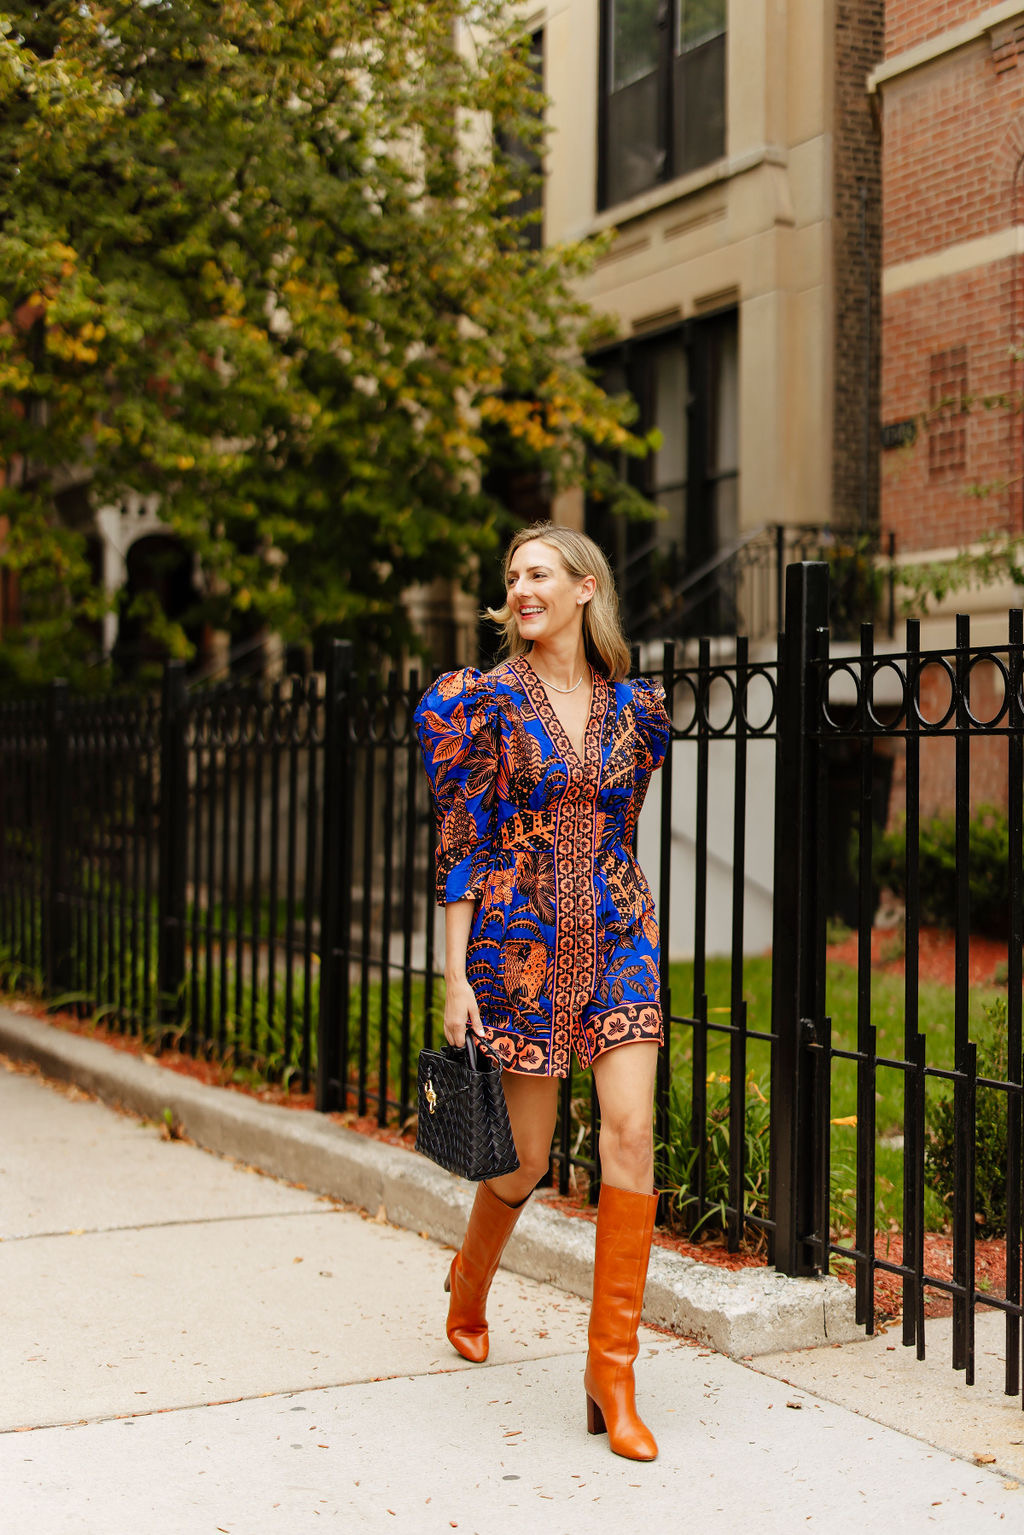 Anna Jane wearing a fun fall dress from Farm Rio Puff-Sleeve Printed Mini Dress in Blue Motif with tall brown riding boots